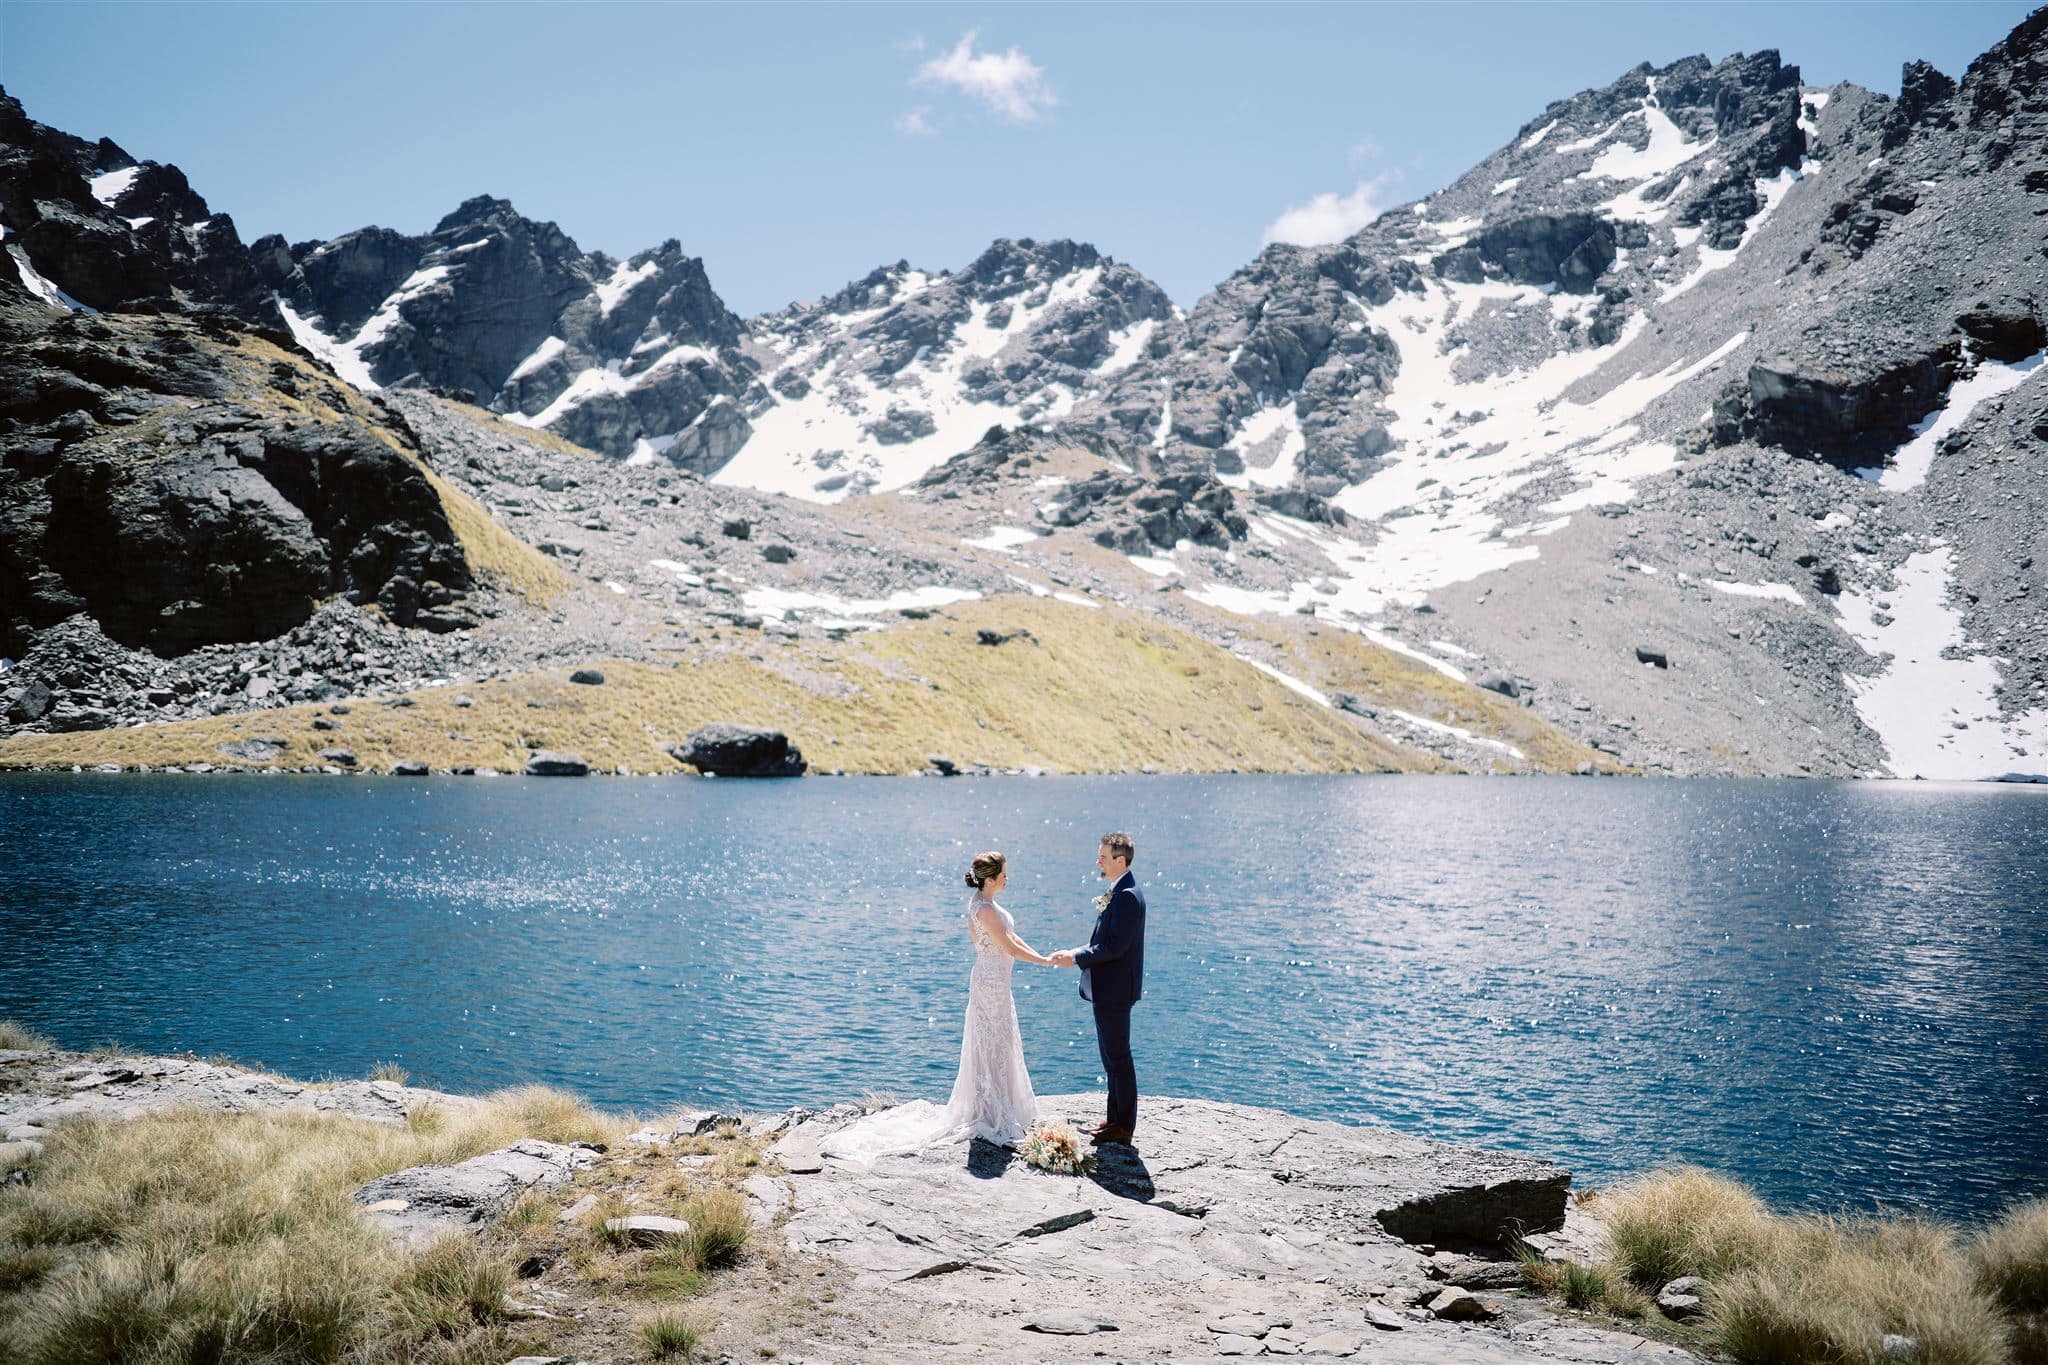 Queenstown New Zealand Elopement Wedding Photographer - A bride and groom happily stand next to a serene lake in the beautiful mountains of Queenstown, one of the top heli-wedding locations and destinations.